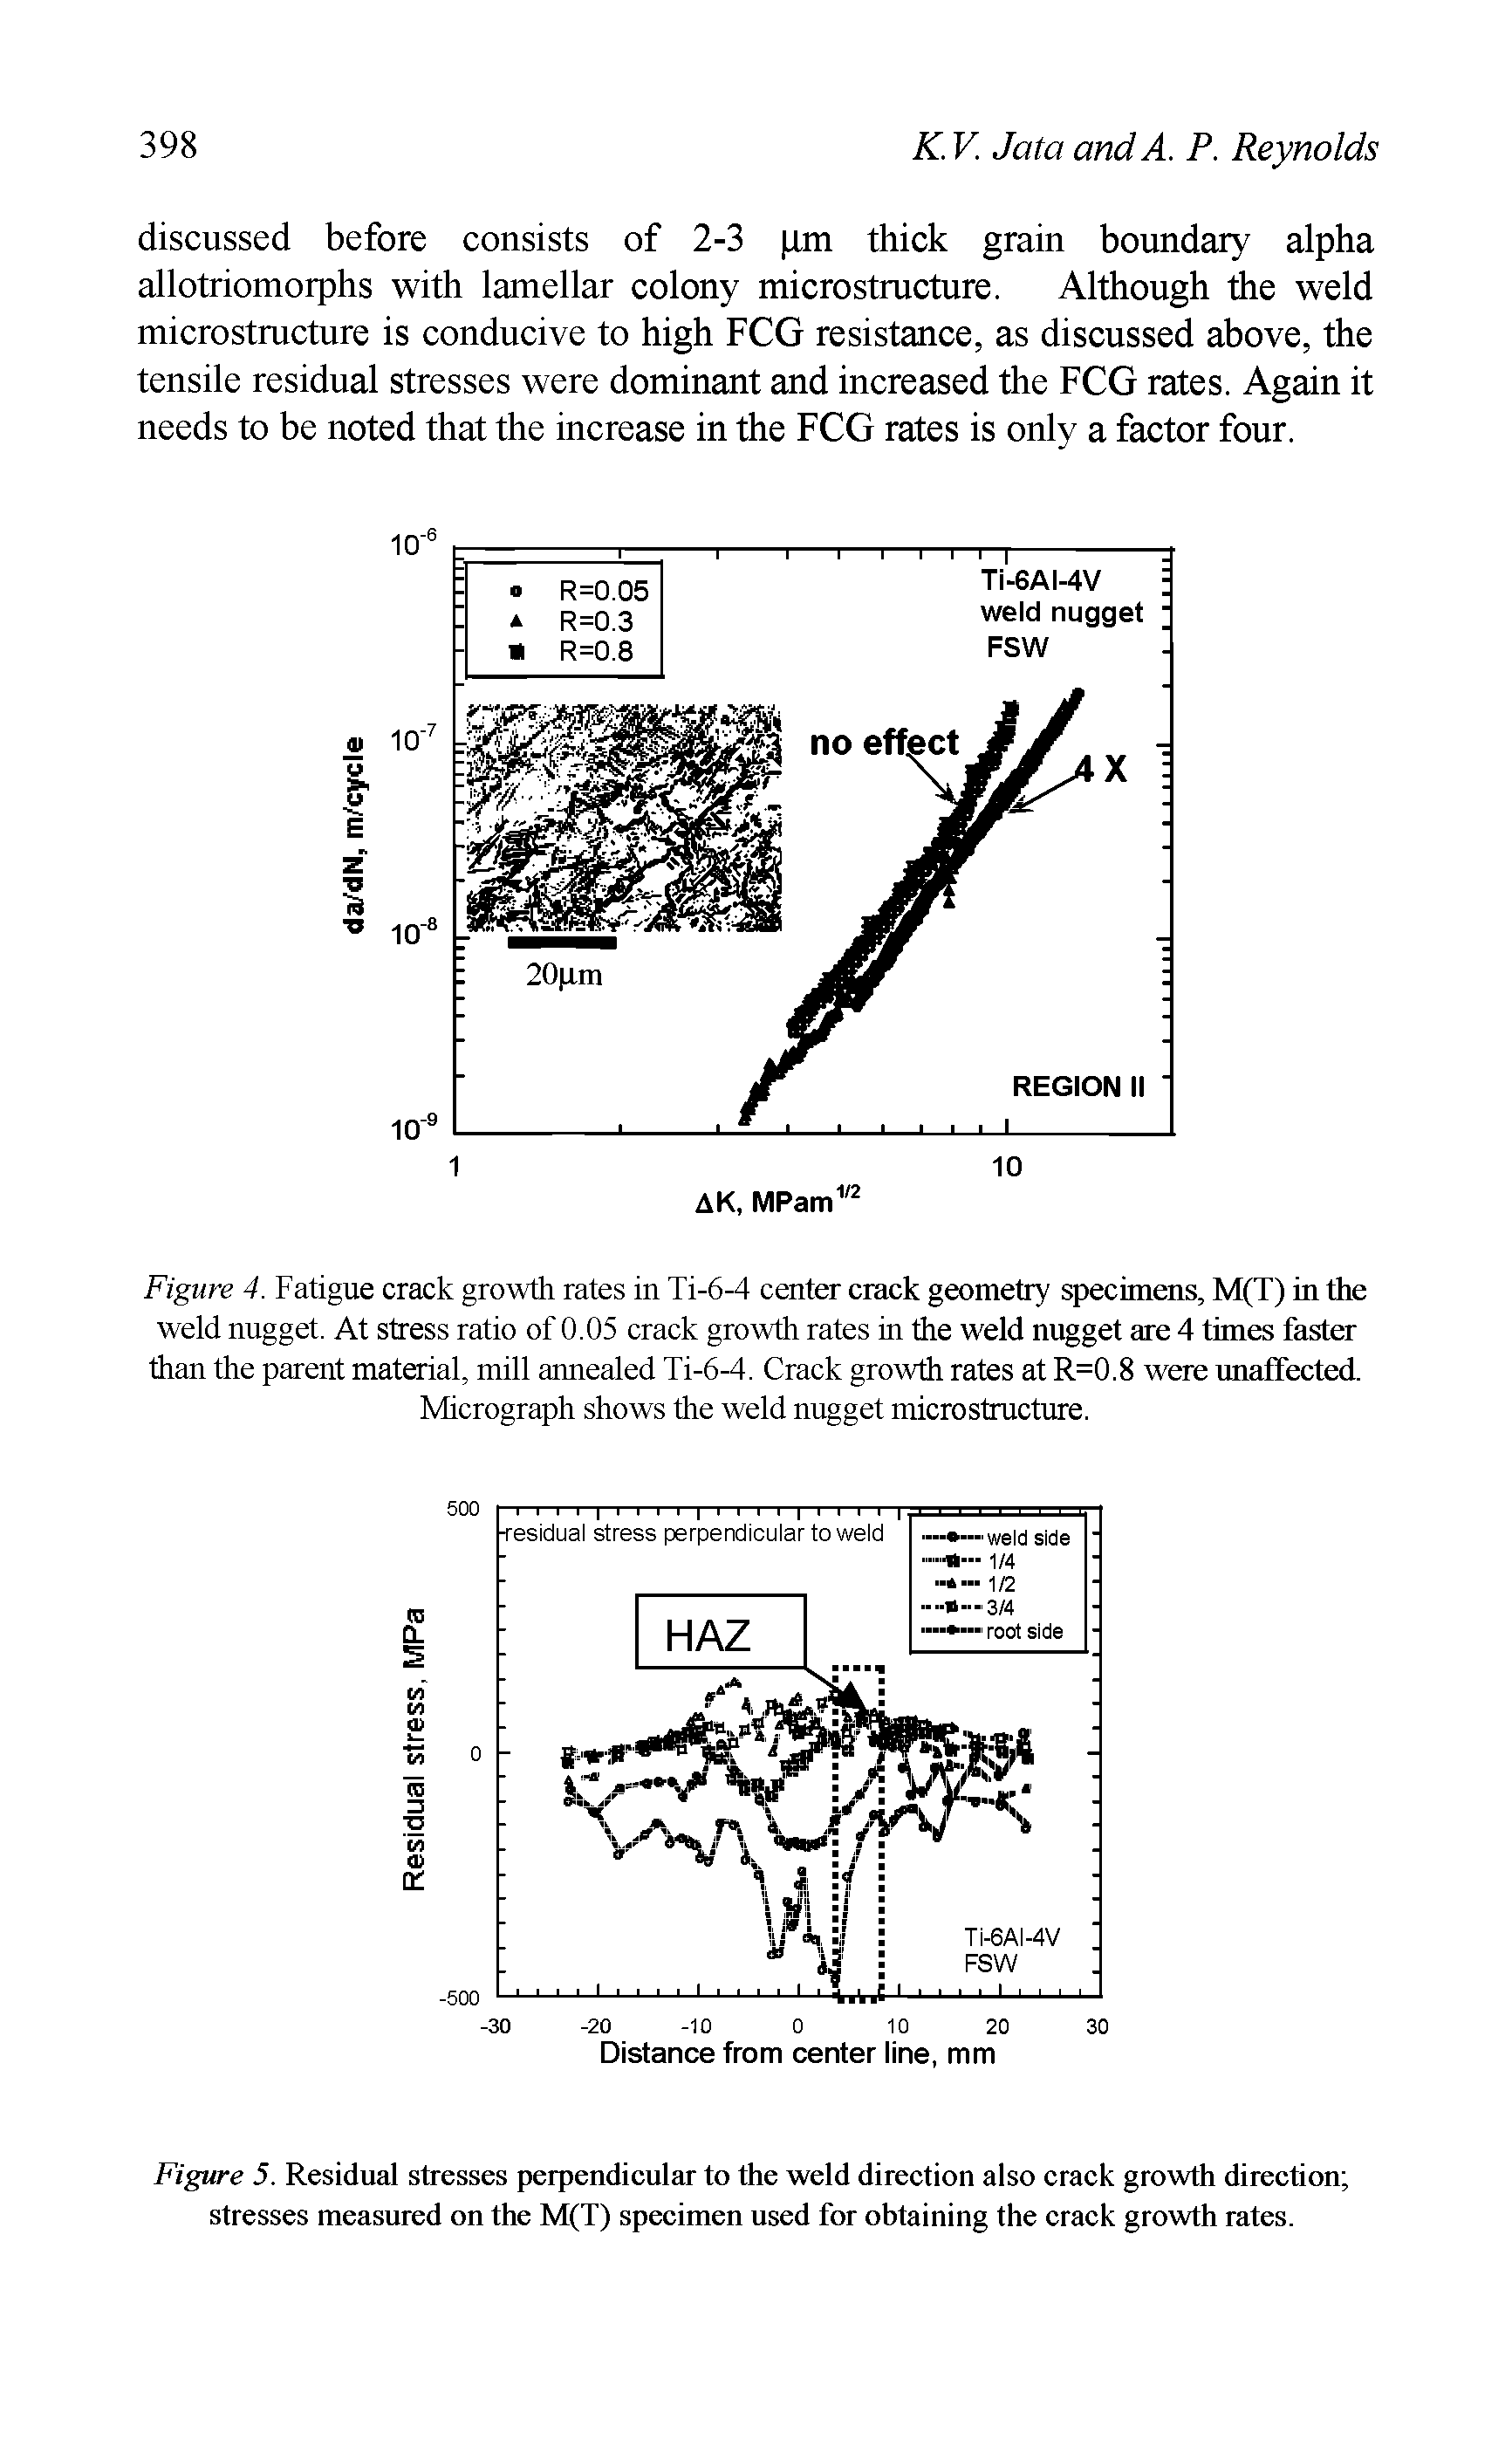 Figure 4. Fatigue crack growth rates in Ti-6-4 center crack geometry specimens, M(T) in the weld nugget. At stress ratio of 0.05 crack growth rates in the weld nugget are 4 times faster than the parent material, mill annealed Ti-6-4. Crack growth rates at R=0.8 were unaffected. Micrograph shows the weld nugget micro structure.